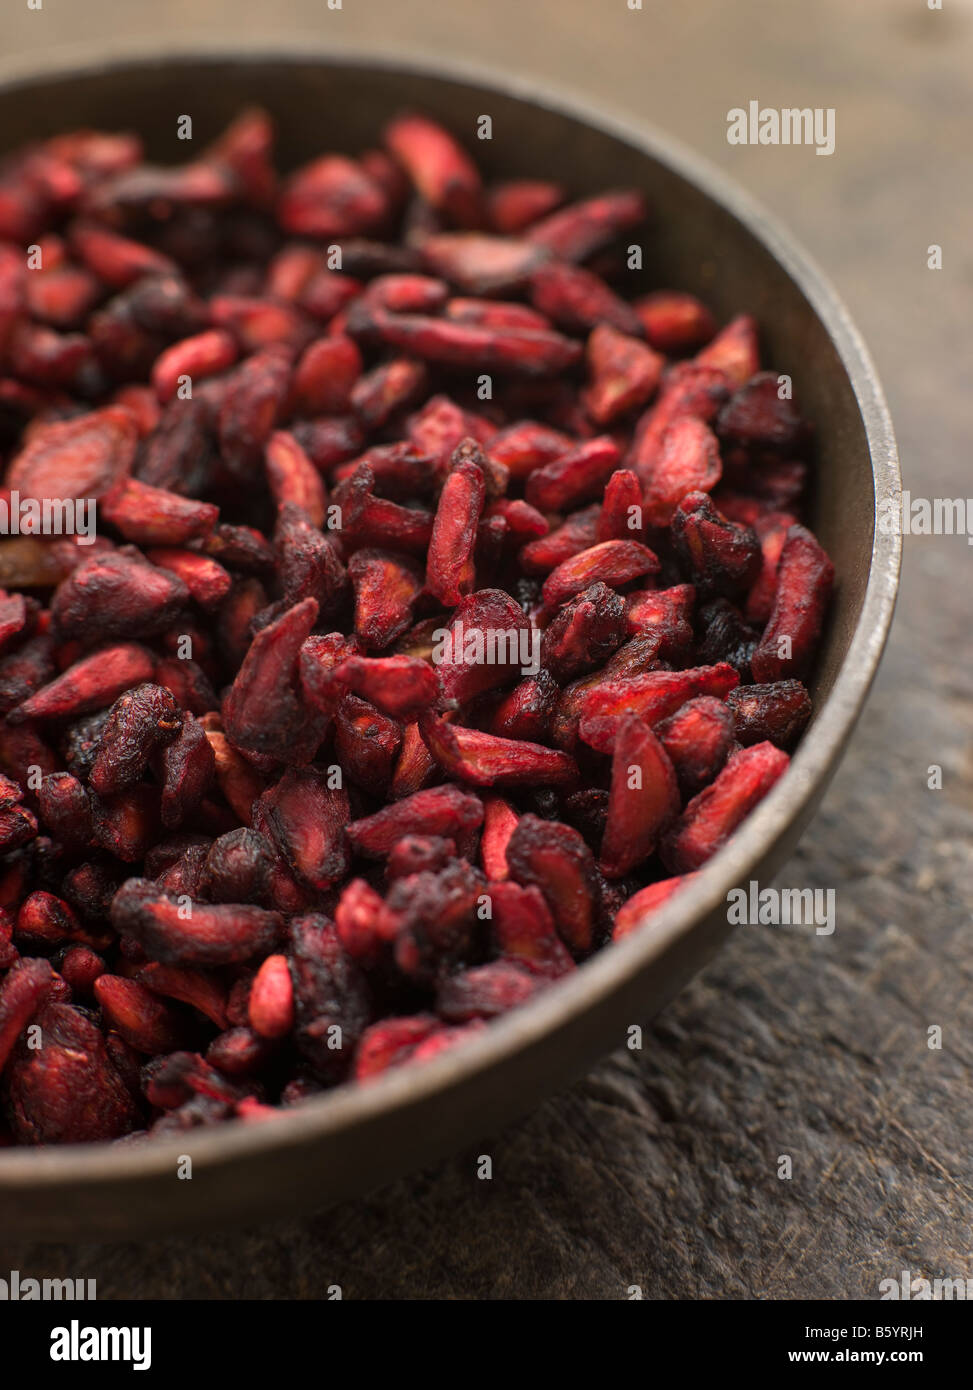 Dish of Dried Pomegranate Seeds Stock Photo